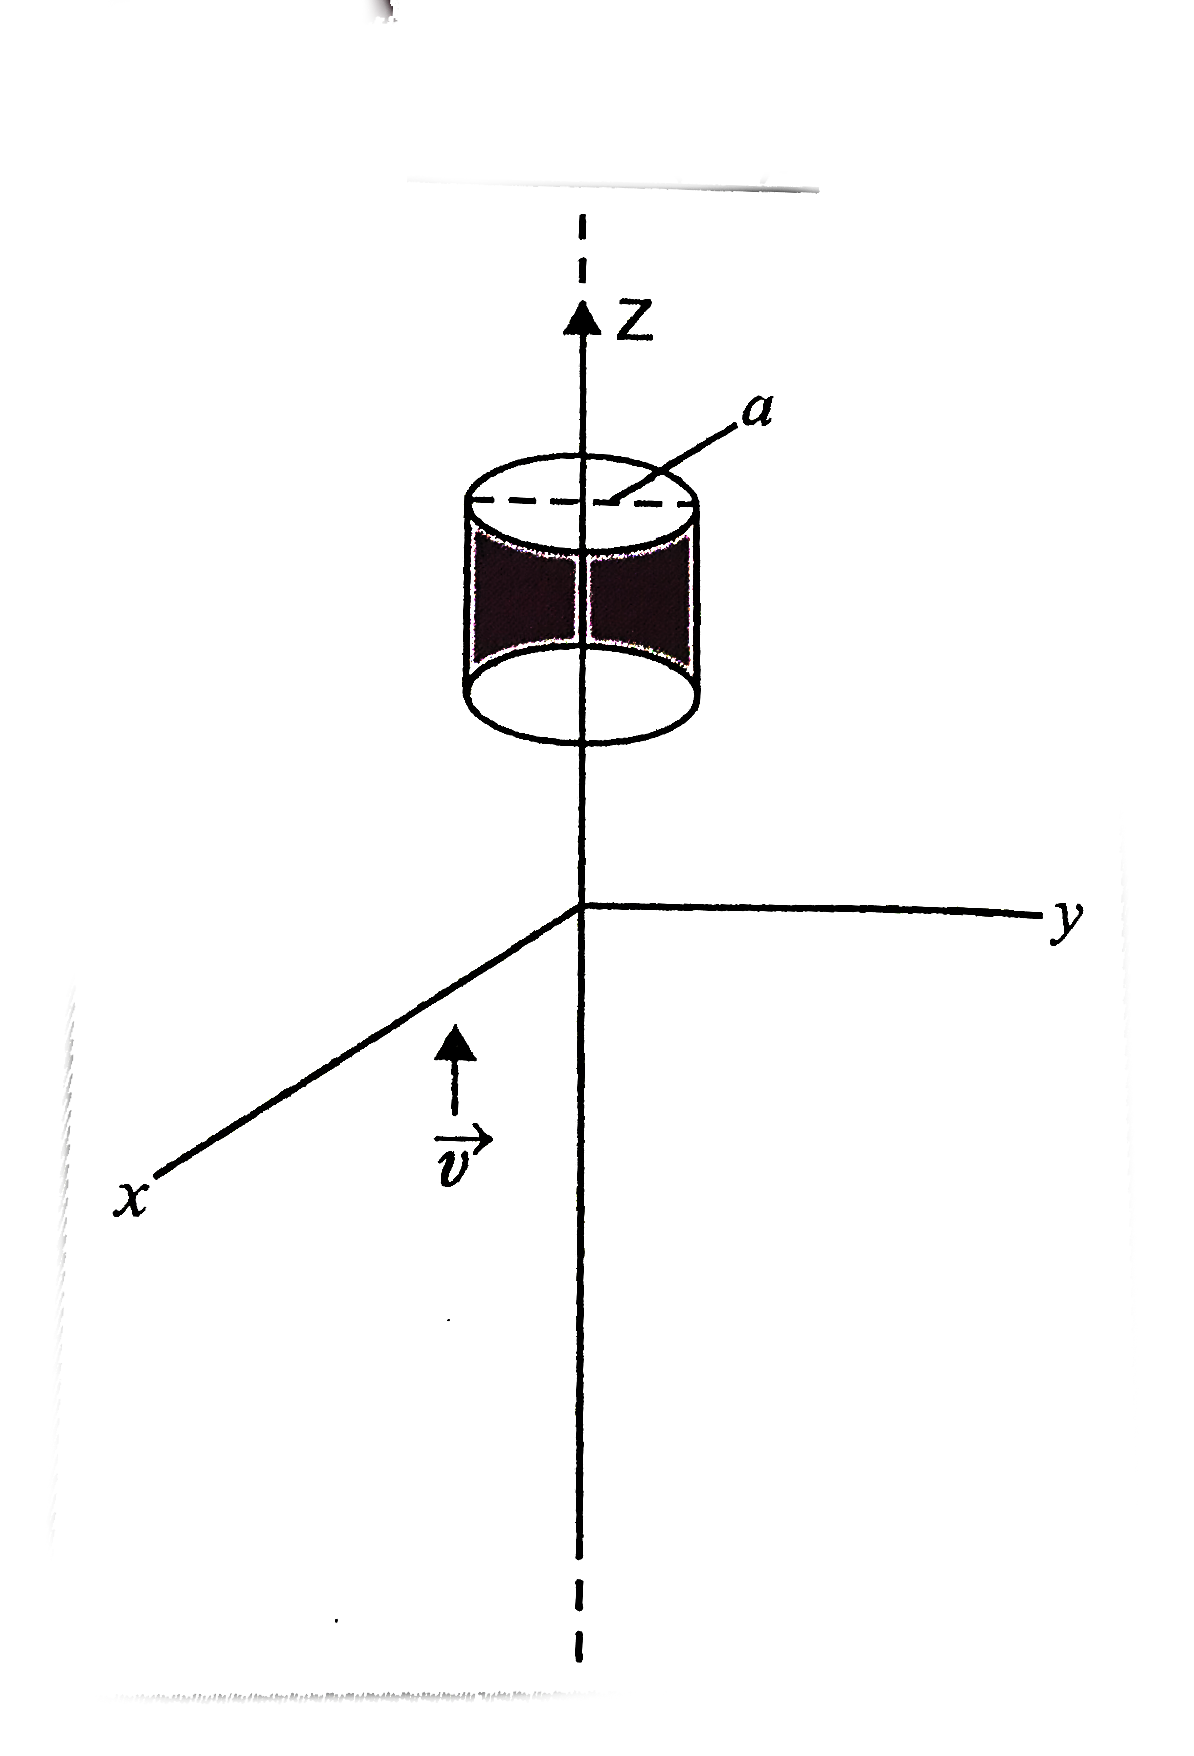 An infinitely long thin  wire carrying a uniform linear static charge density lambda is placed along the z-axis Fig. The wire is set into motion along its length with a uniform velocity vecv=vhatk. Calculate the poynting vector vecS=1/(mu0)(vecExxvecB).